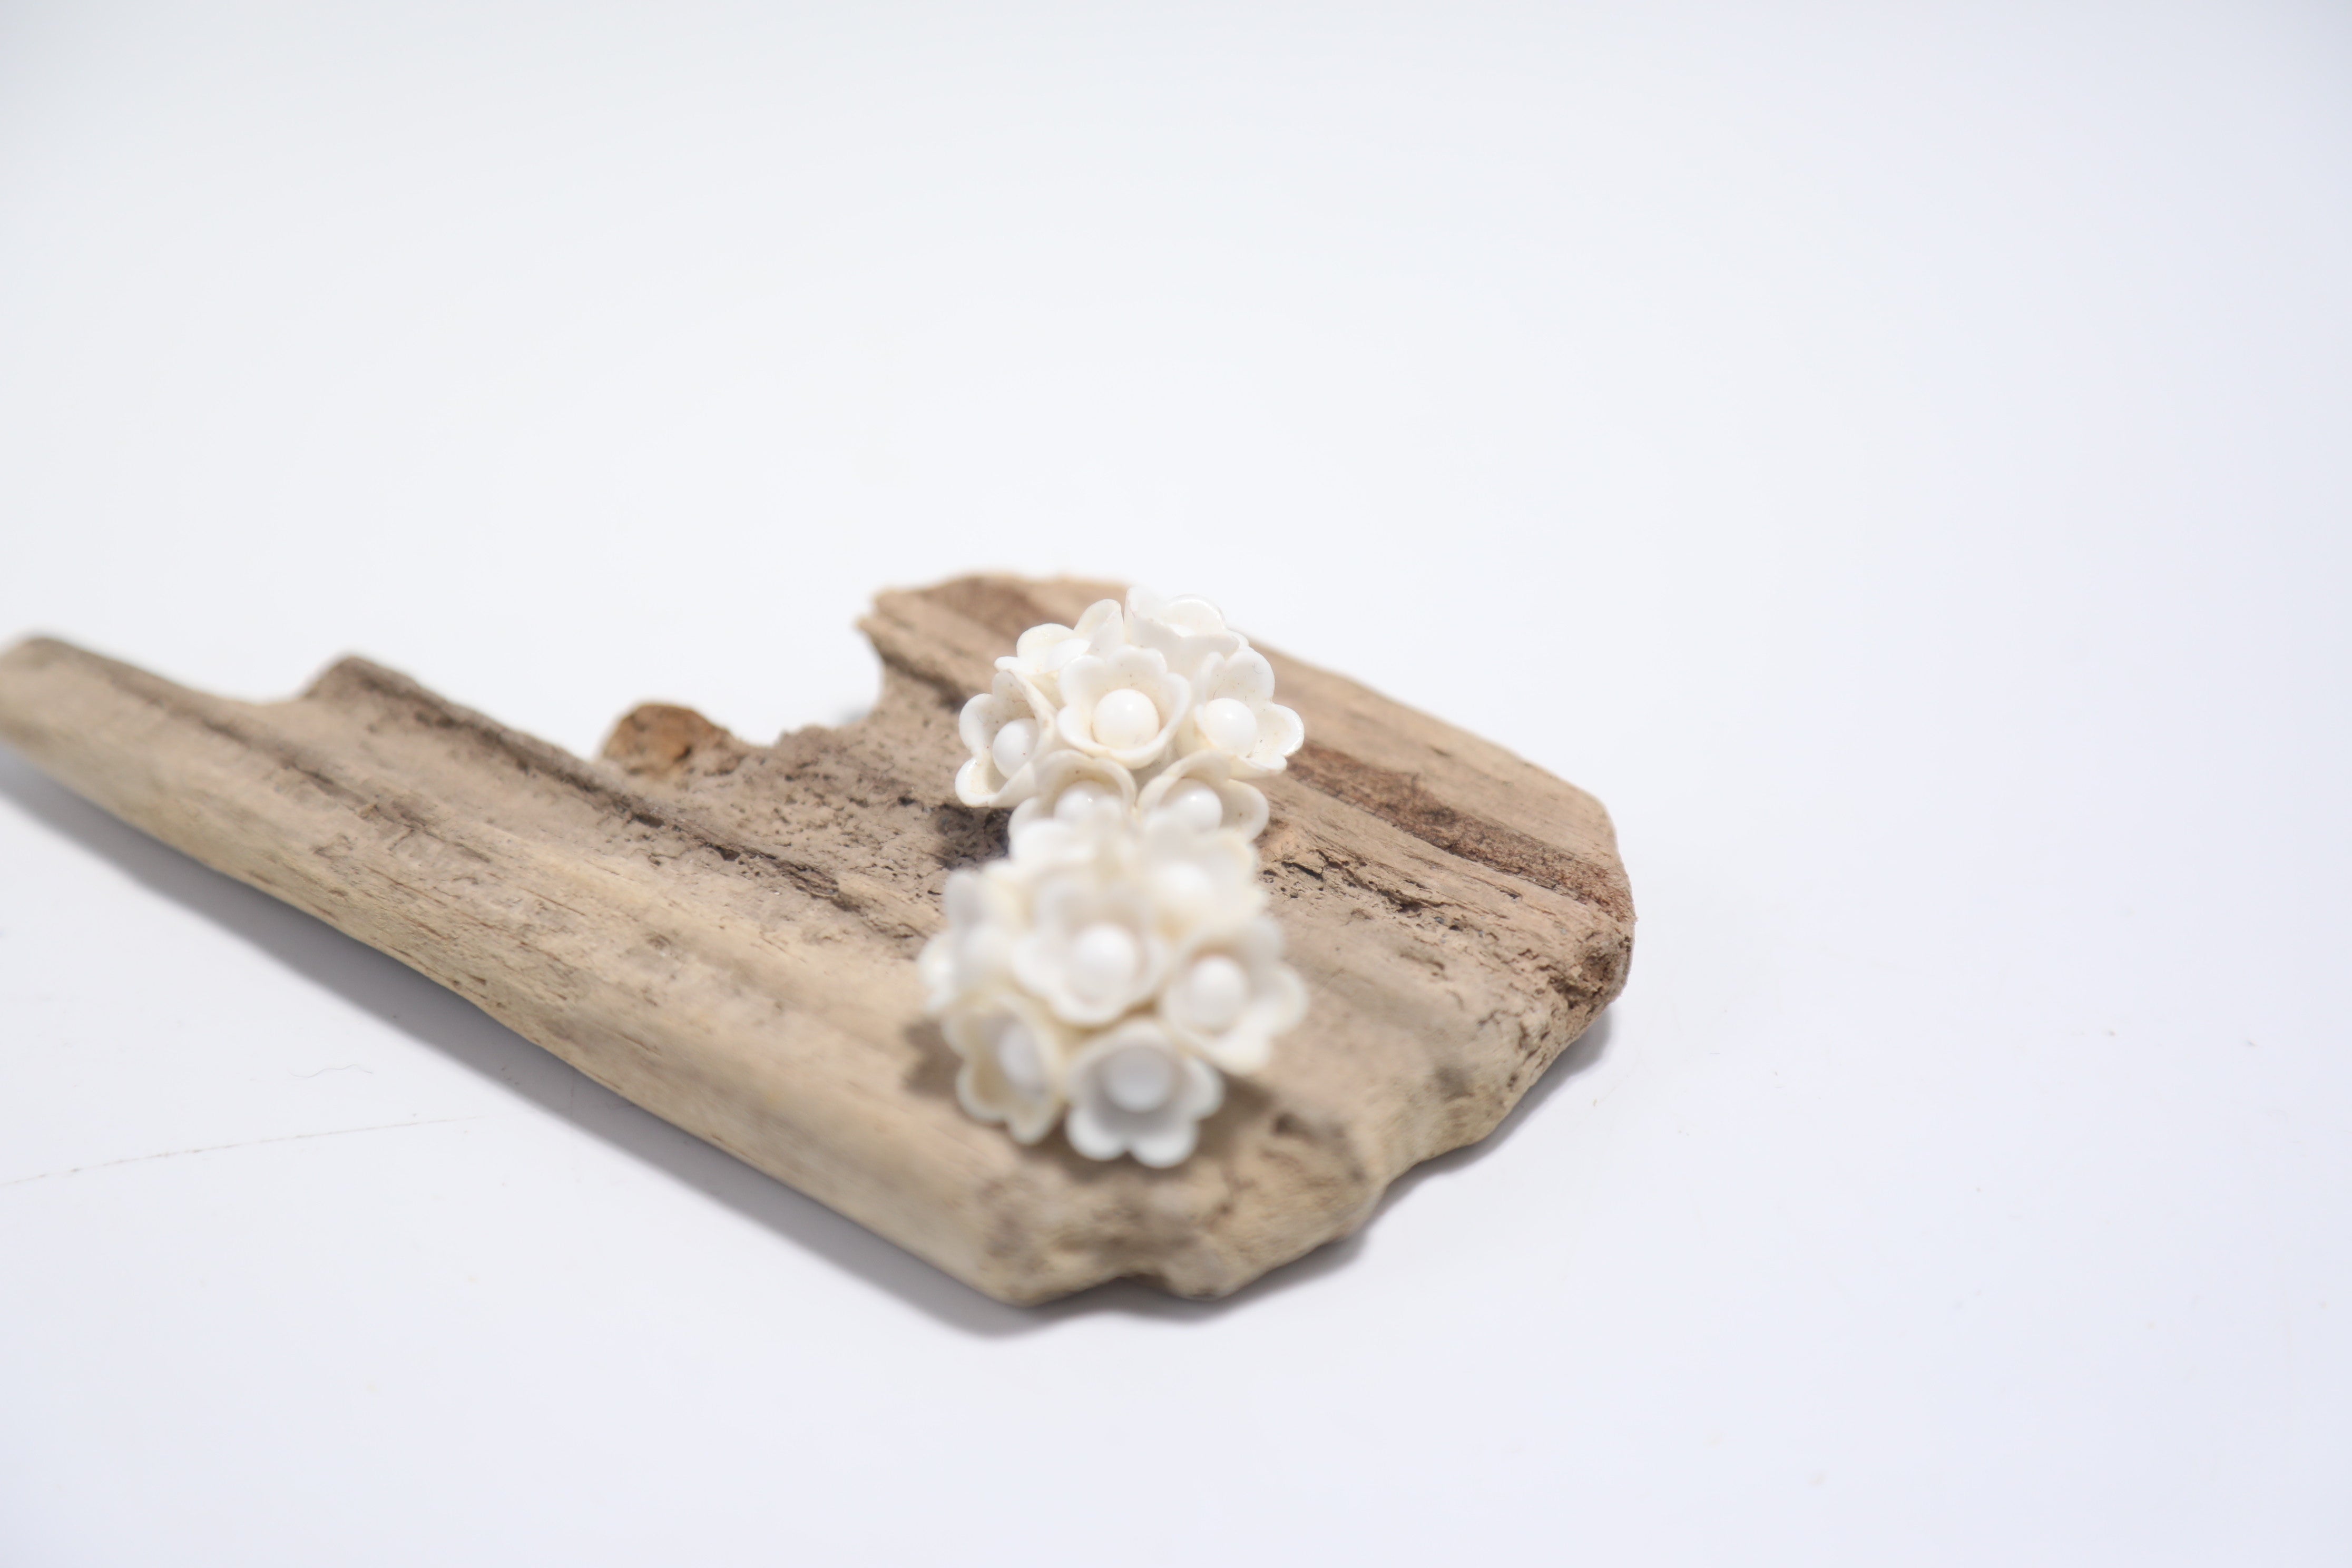 Vintage 1940s floral white bold clip on earrings